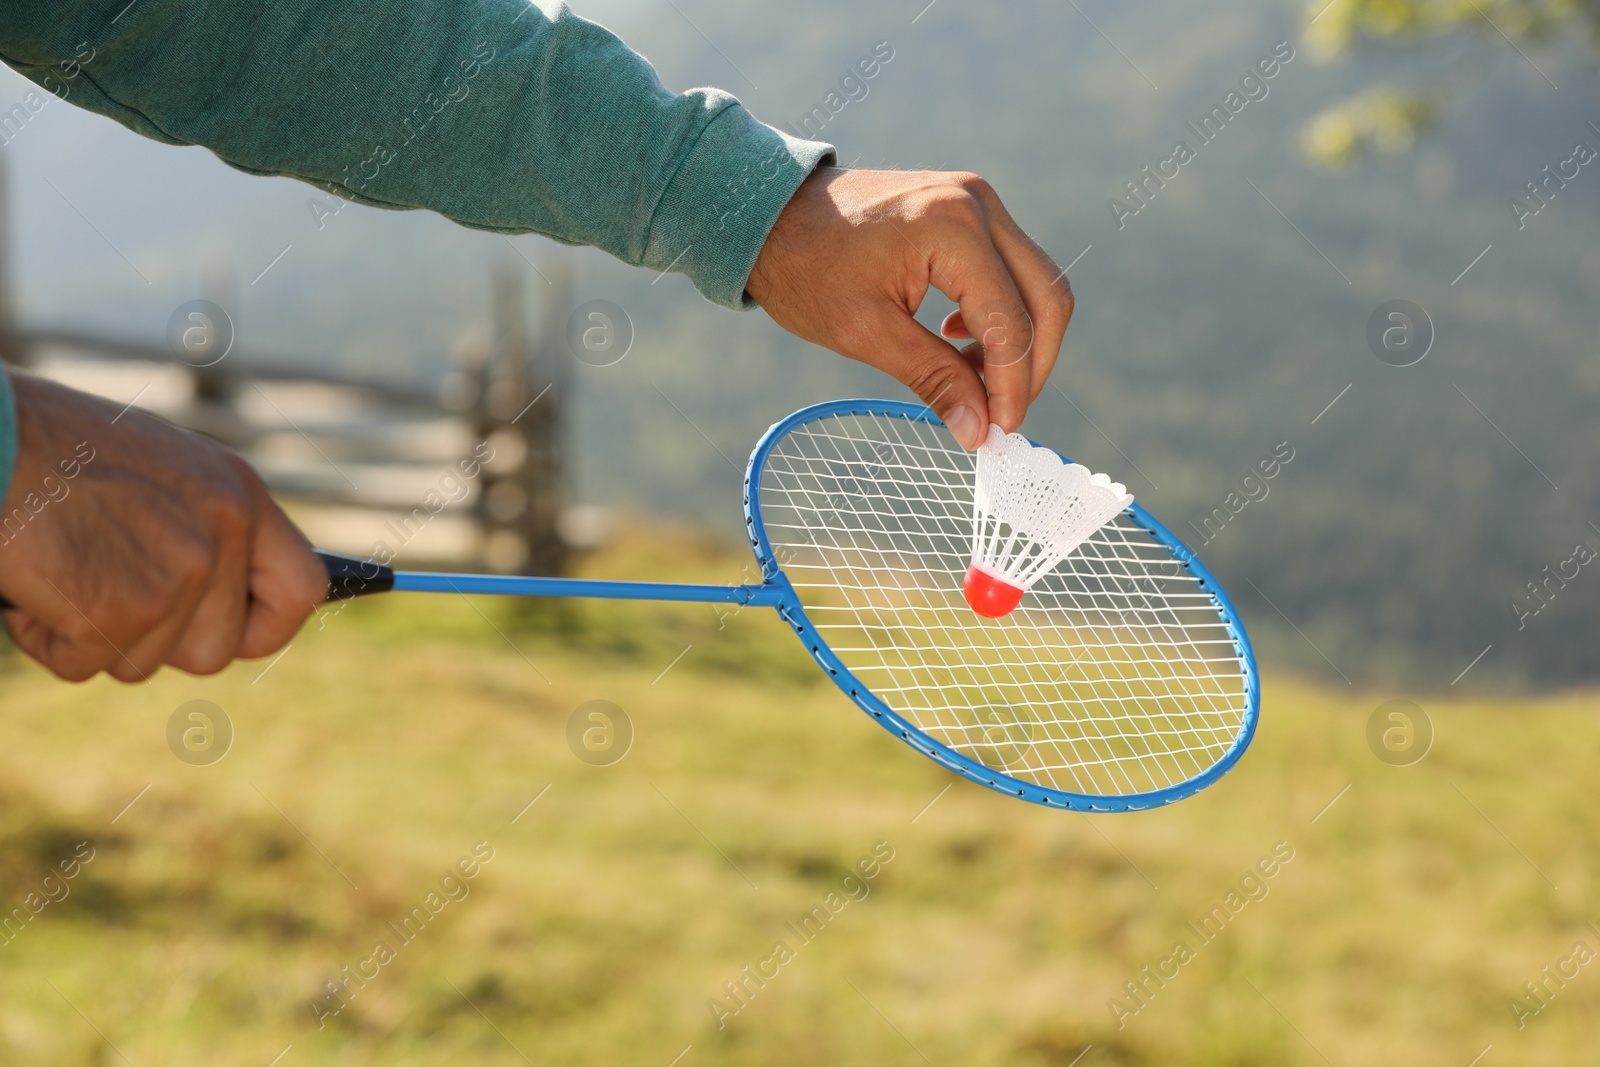 Photo of Man playing badminton outdoors on sunny day, closeup